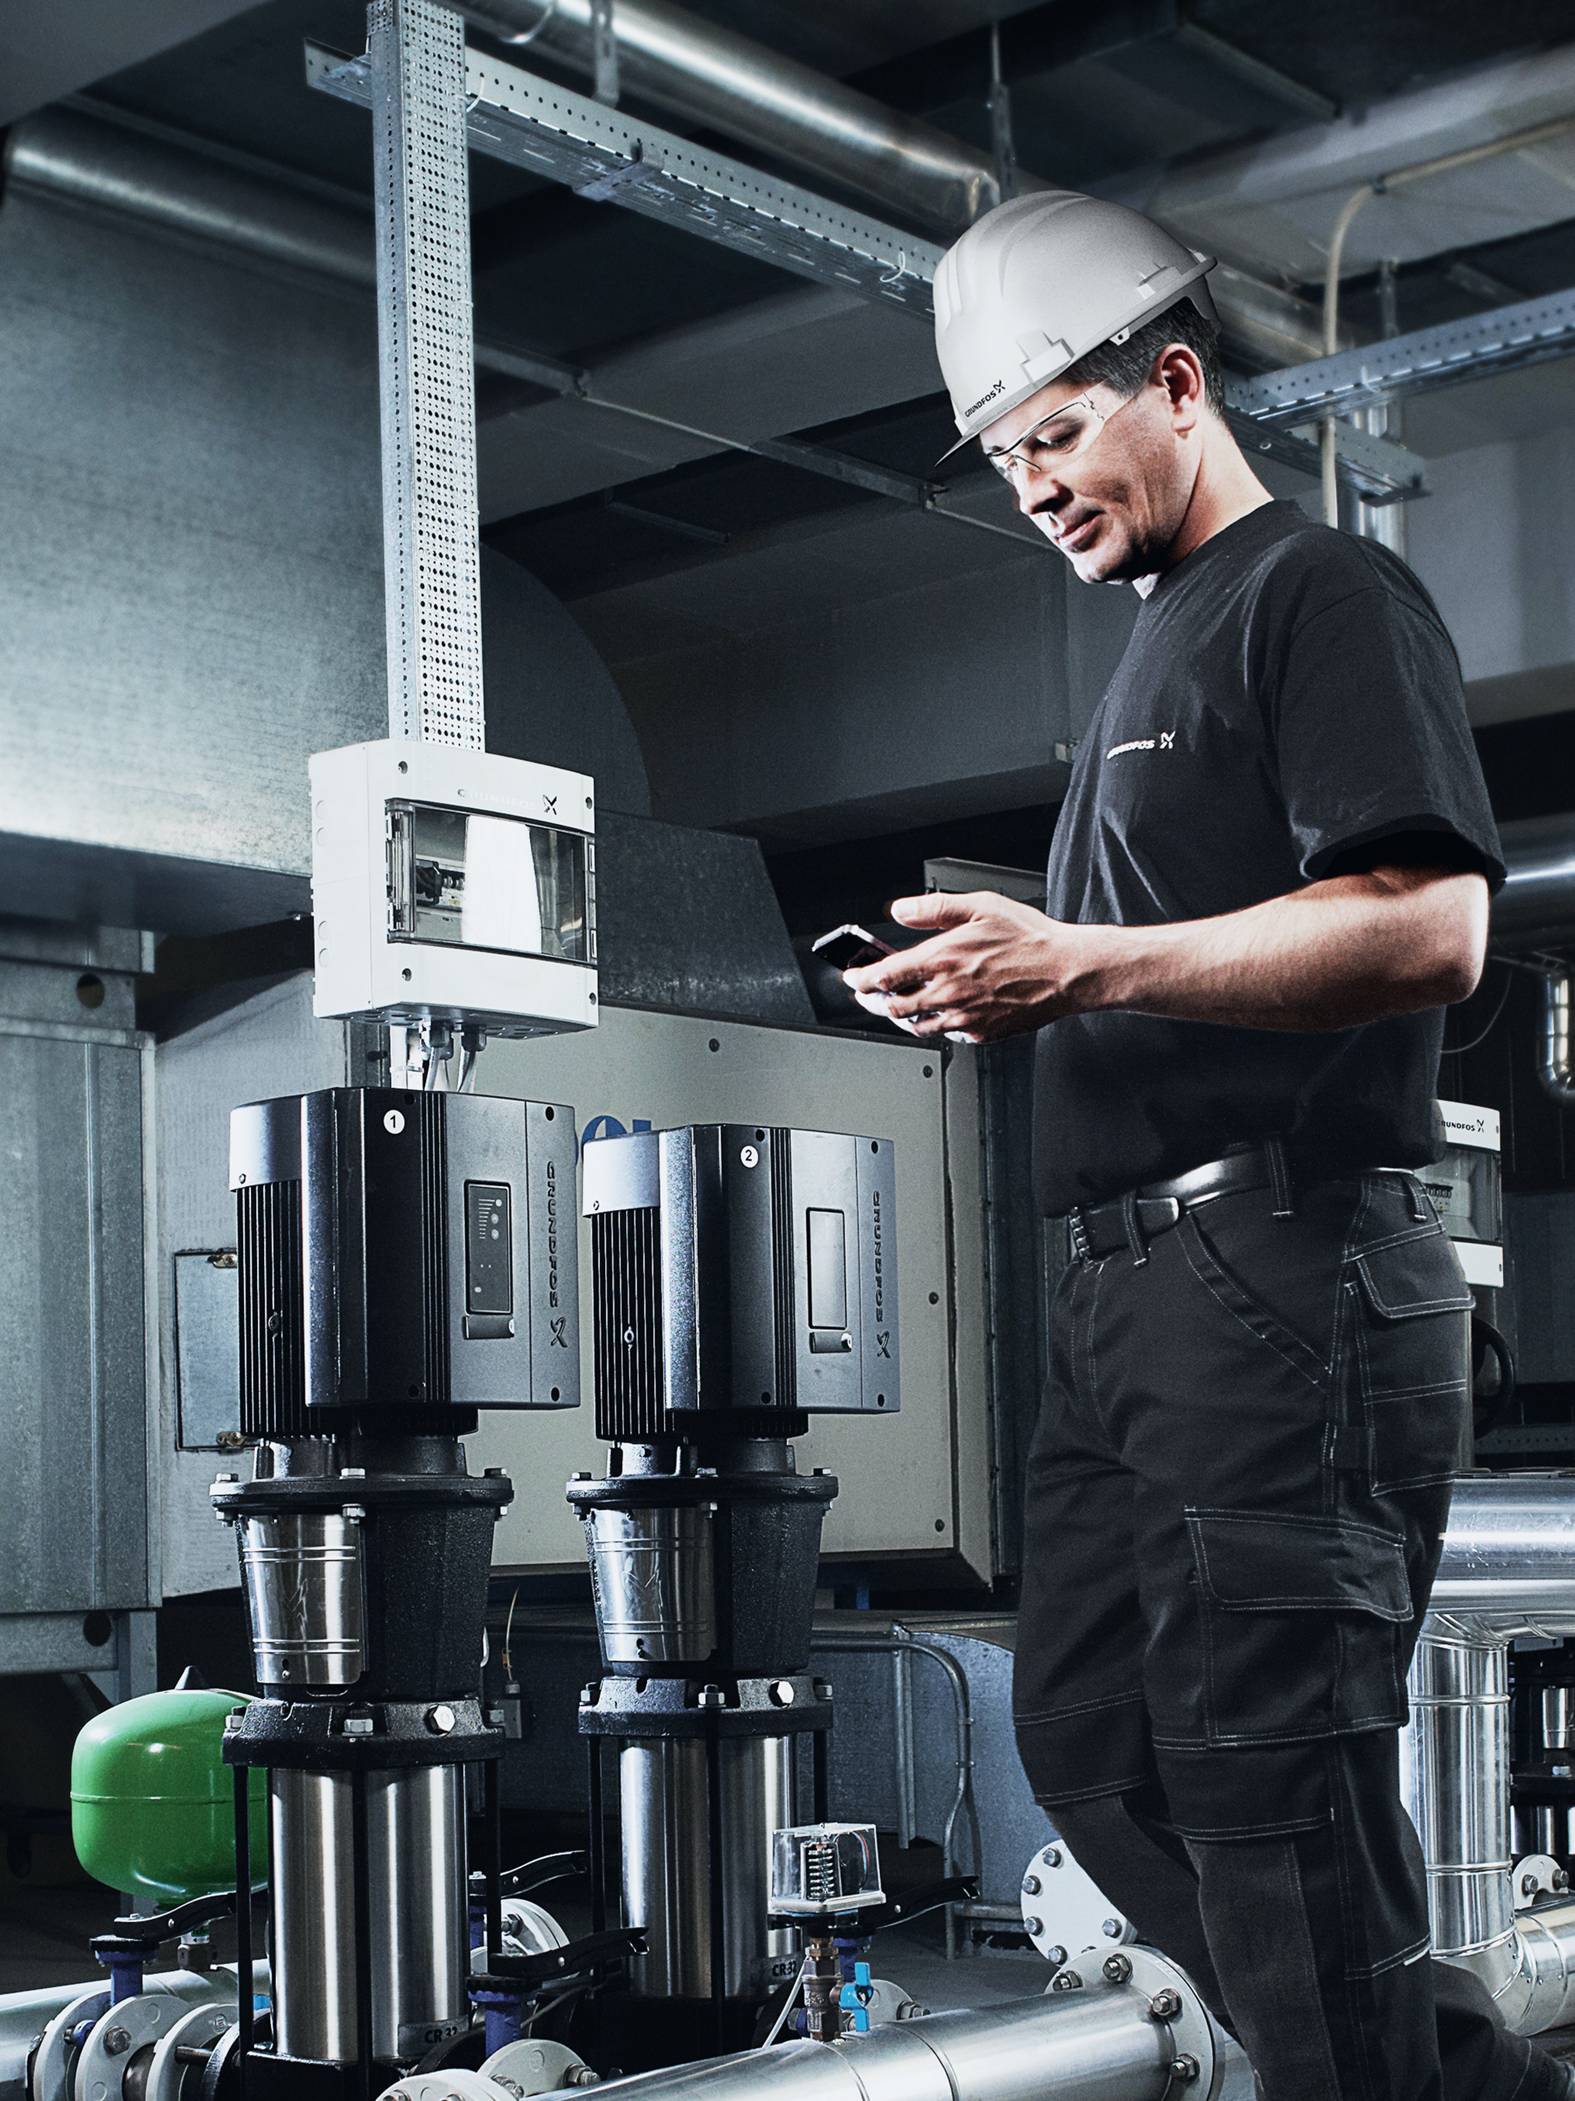 English (USA) | The full range supplier of pumps and pump solutions. As a renowned pump manufacturer, Grundfos delivers efficient, reliable, and solutions all over the globe. Step into our world.